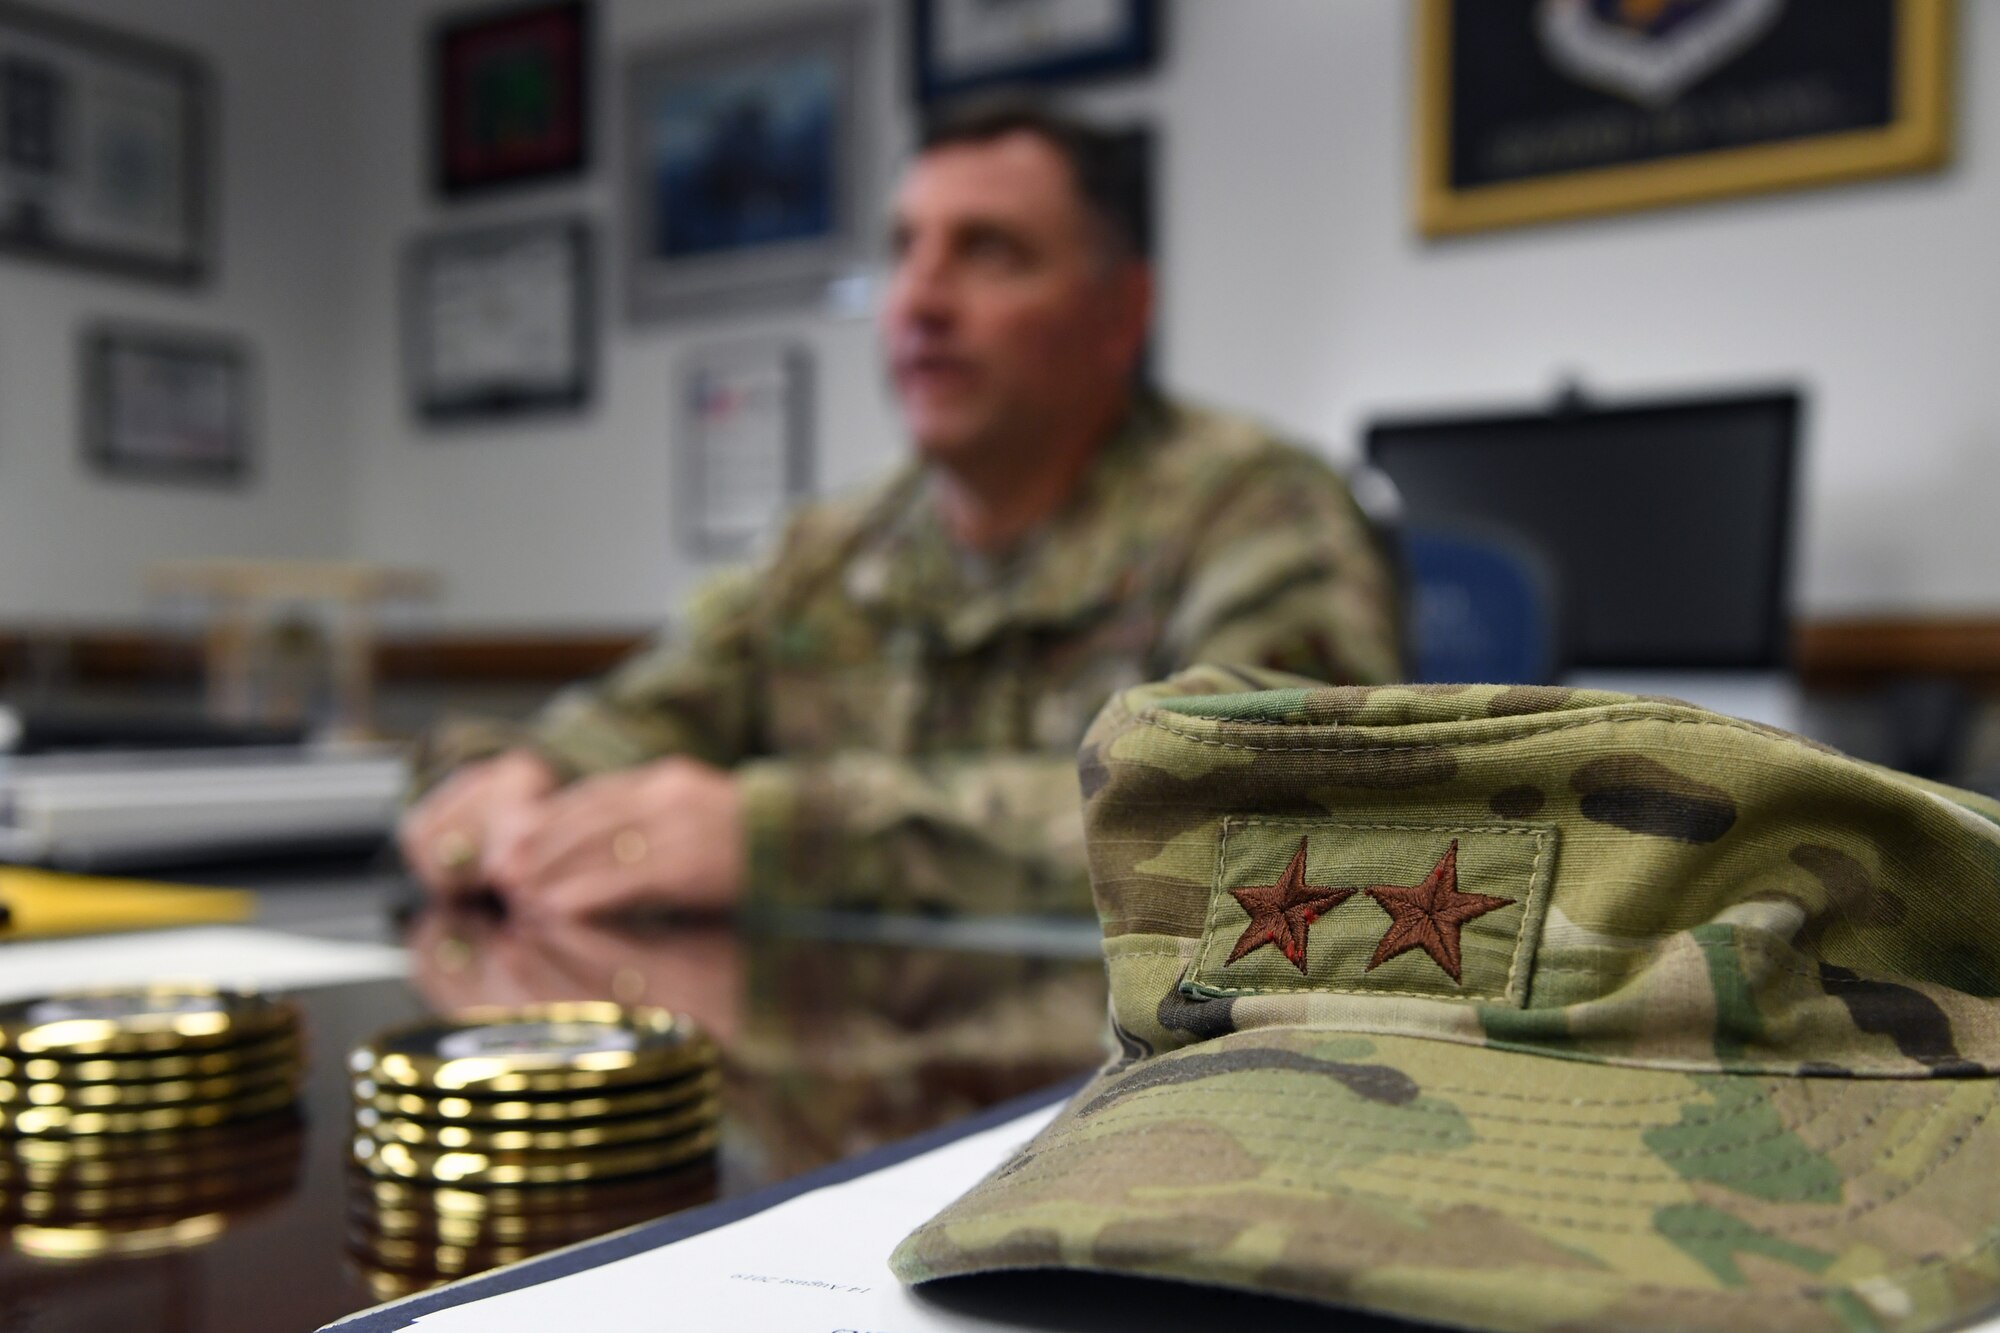 A hat belonging to U.S. Air Force Maj. Gen. Timothy Leahy, Second Air Force commander, is on display during an interview inside his office on Keesler Air Force Base, Mississippi, Aug. 14, 2019. Leahy will retire on Dec. 1 with more than 34 years of military service. Throughout his career, Leahy held positions at the major command, sub-unified combatant command and geographic and functional combatant command levels. He also commanded at the squadron, wing, center and numbered Air Force level. Additionally, Leahy is a command pilot with more than 3,200 hours of flight time, primarily in Special Operations Forces aircraft. (U.S. Air Force photo by Kemberly Groue)